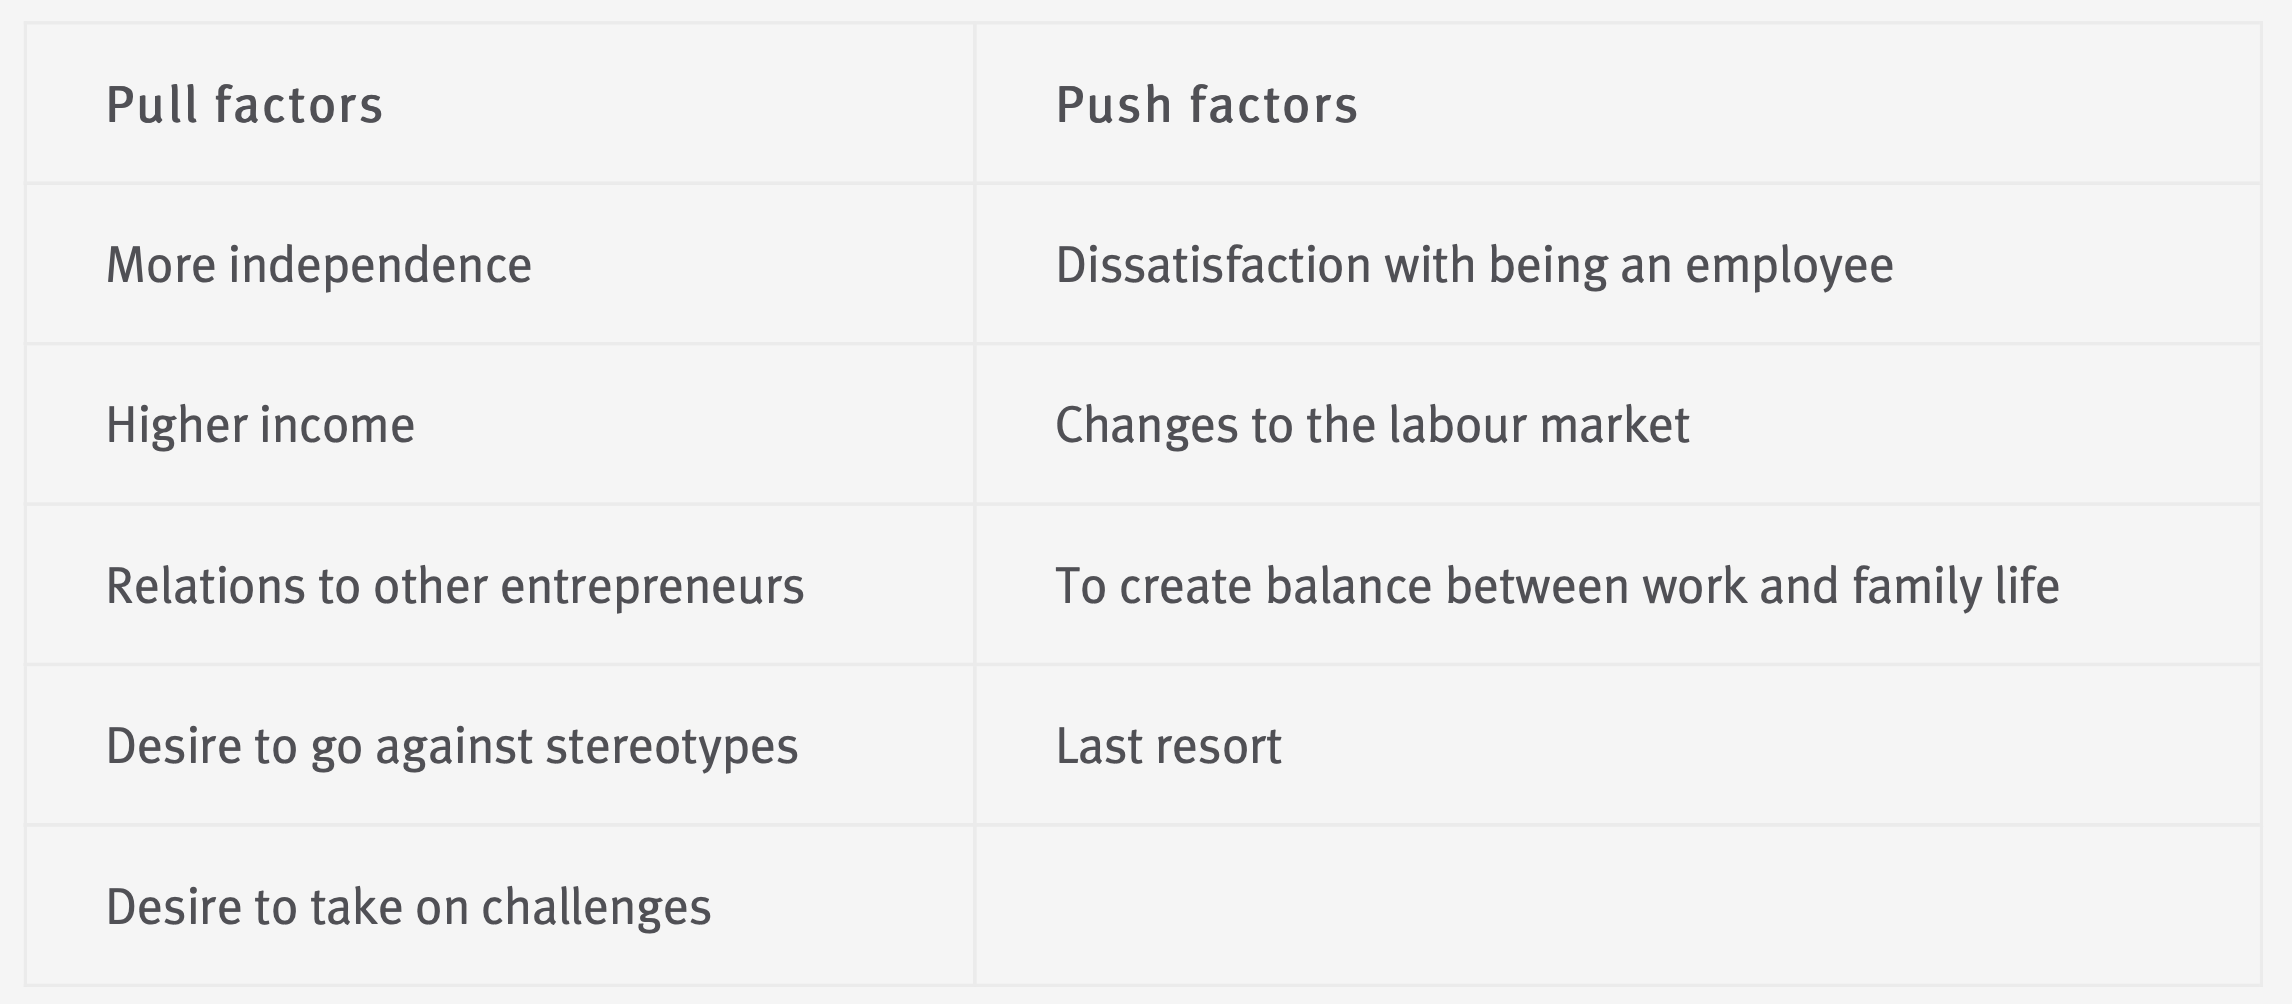 Push and pull factors